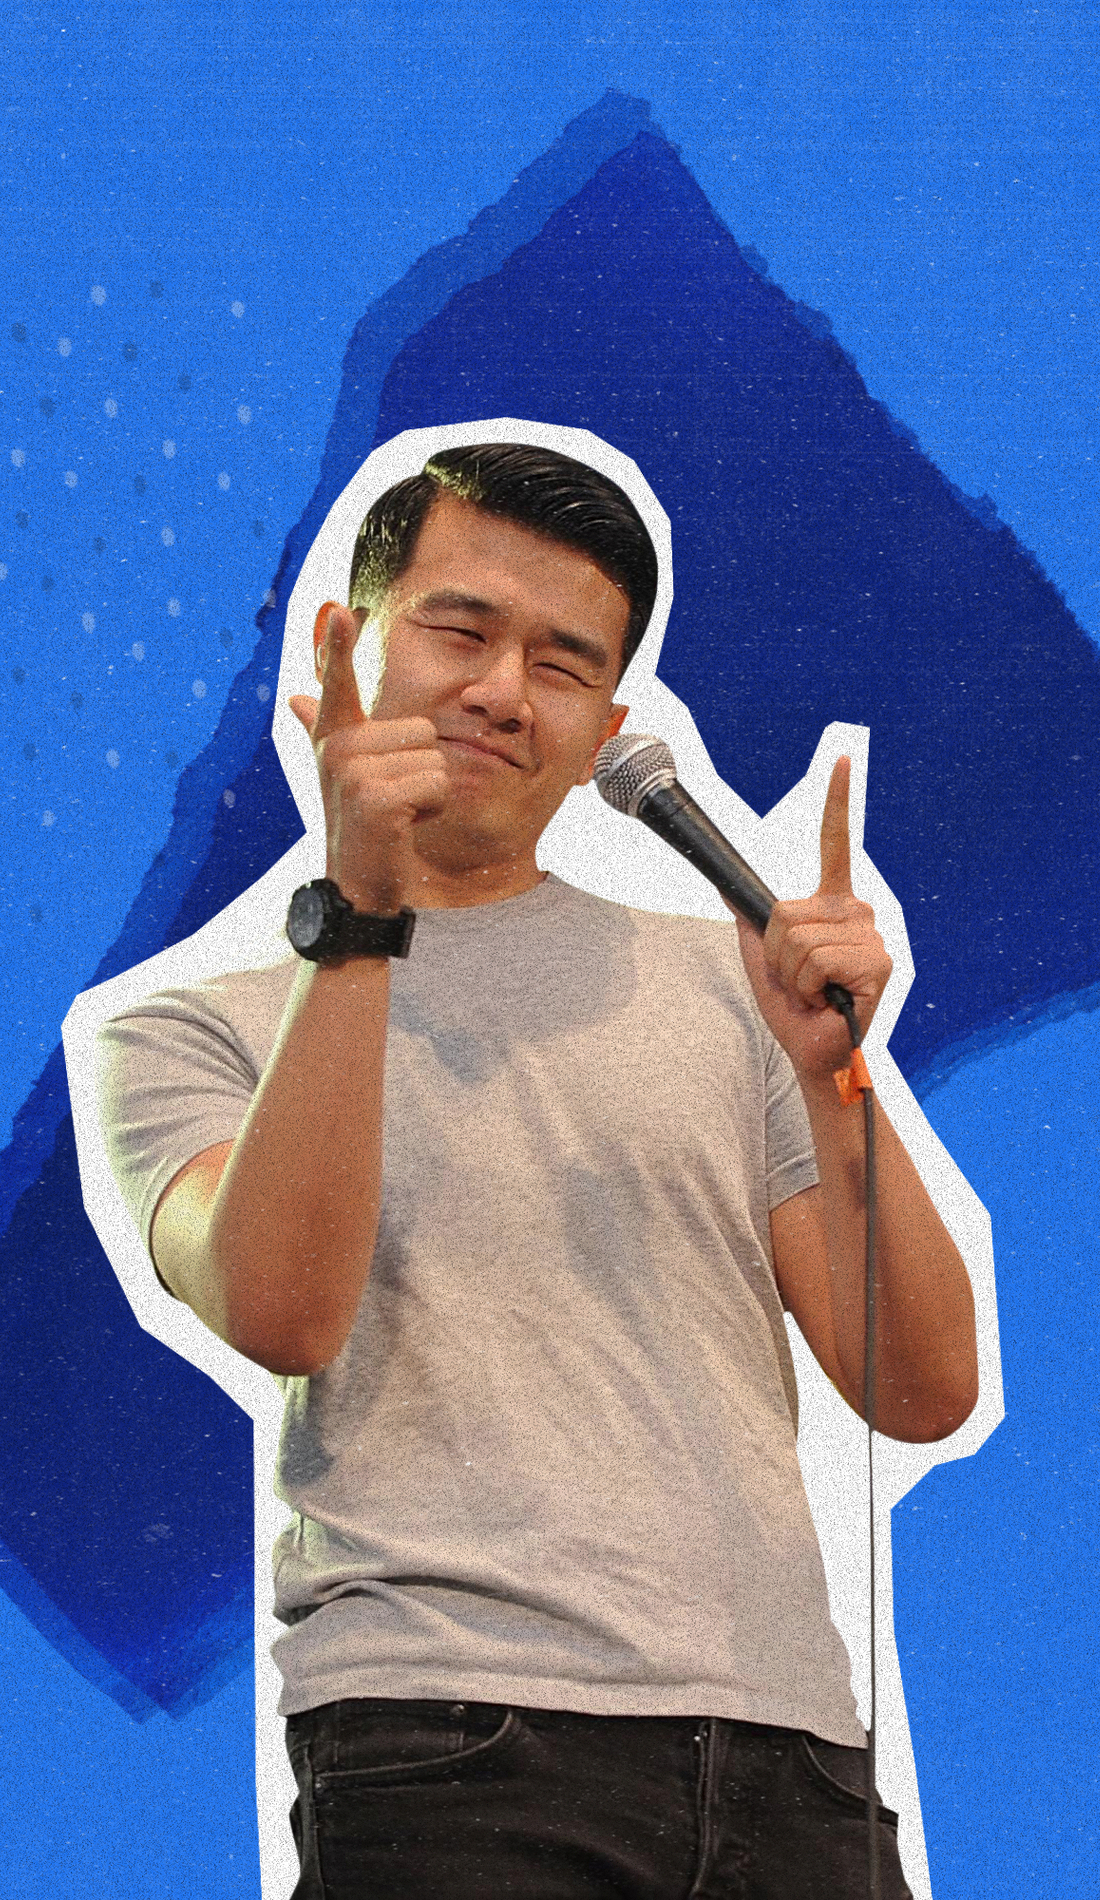 A Ronny Chieng live event